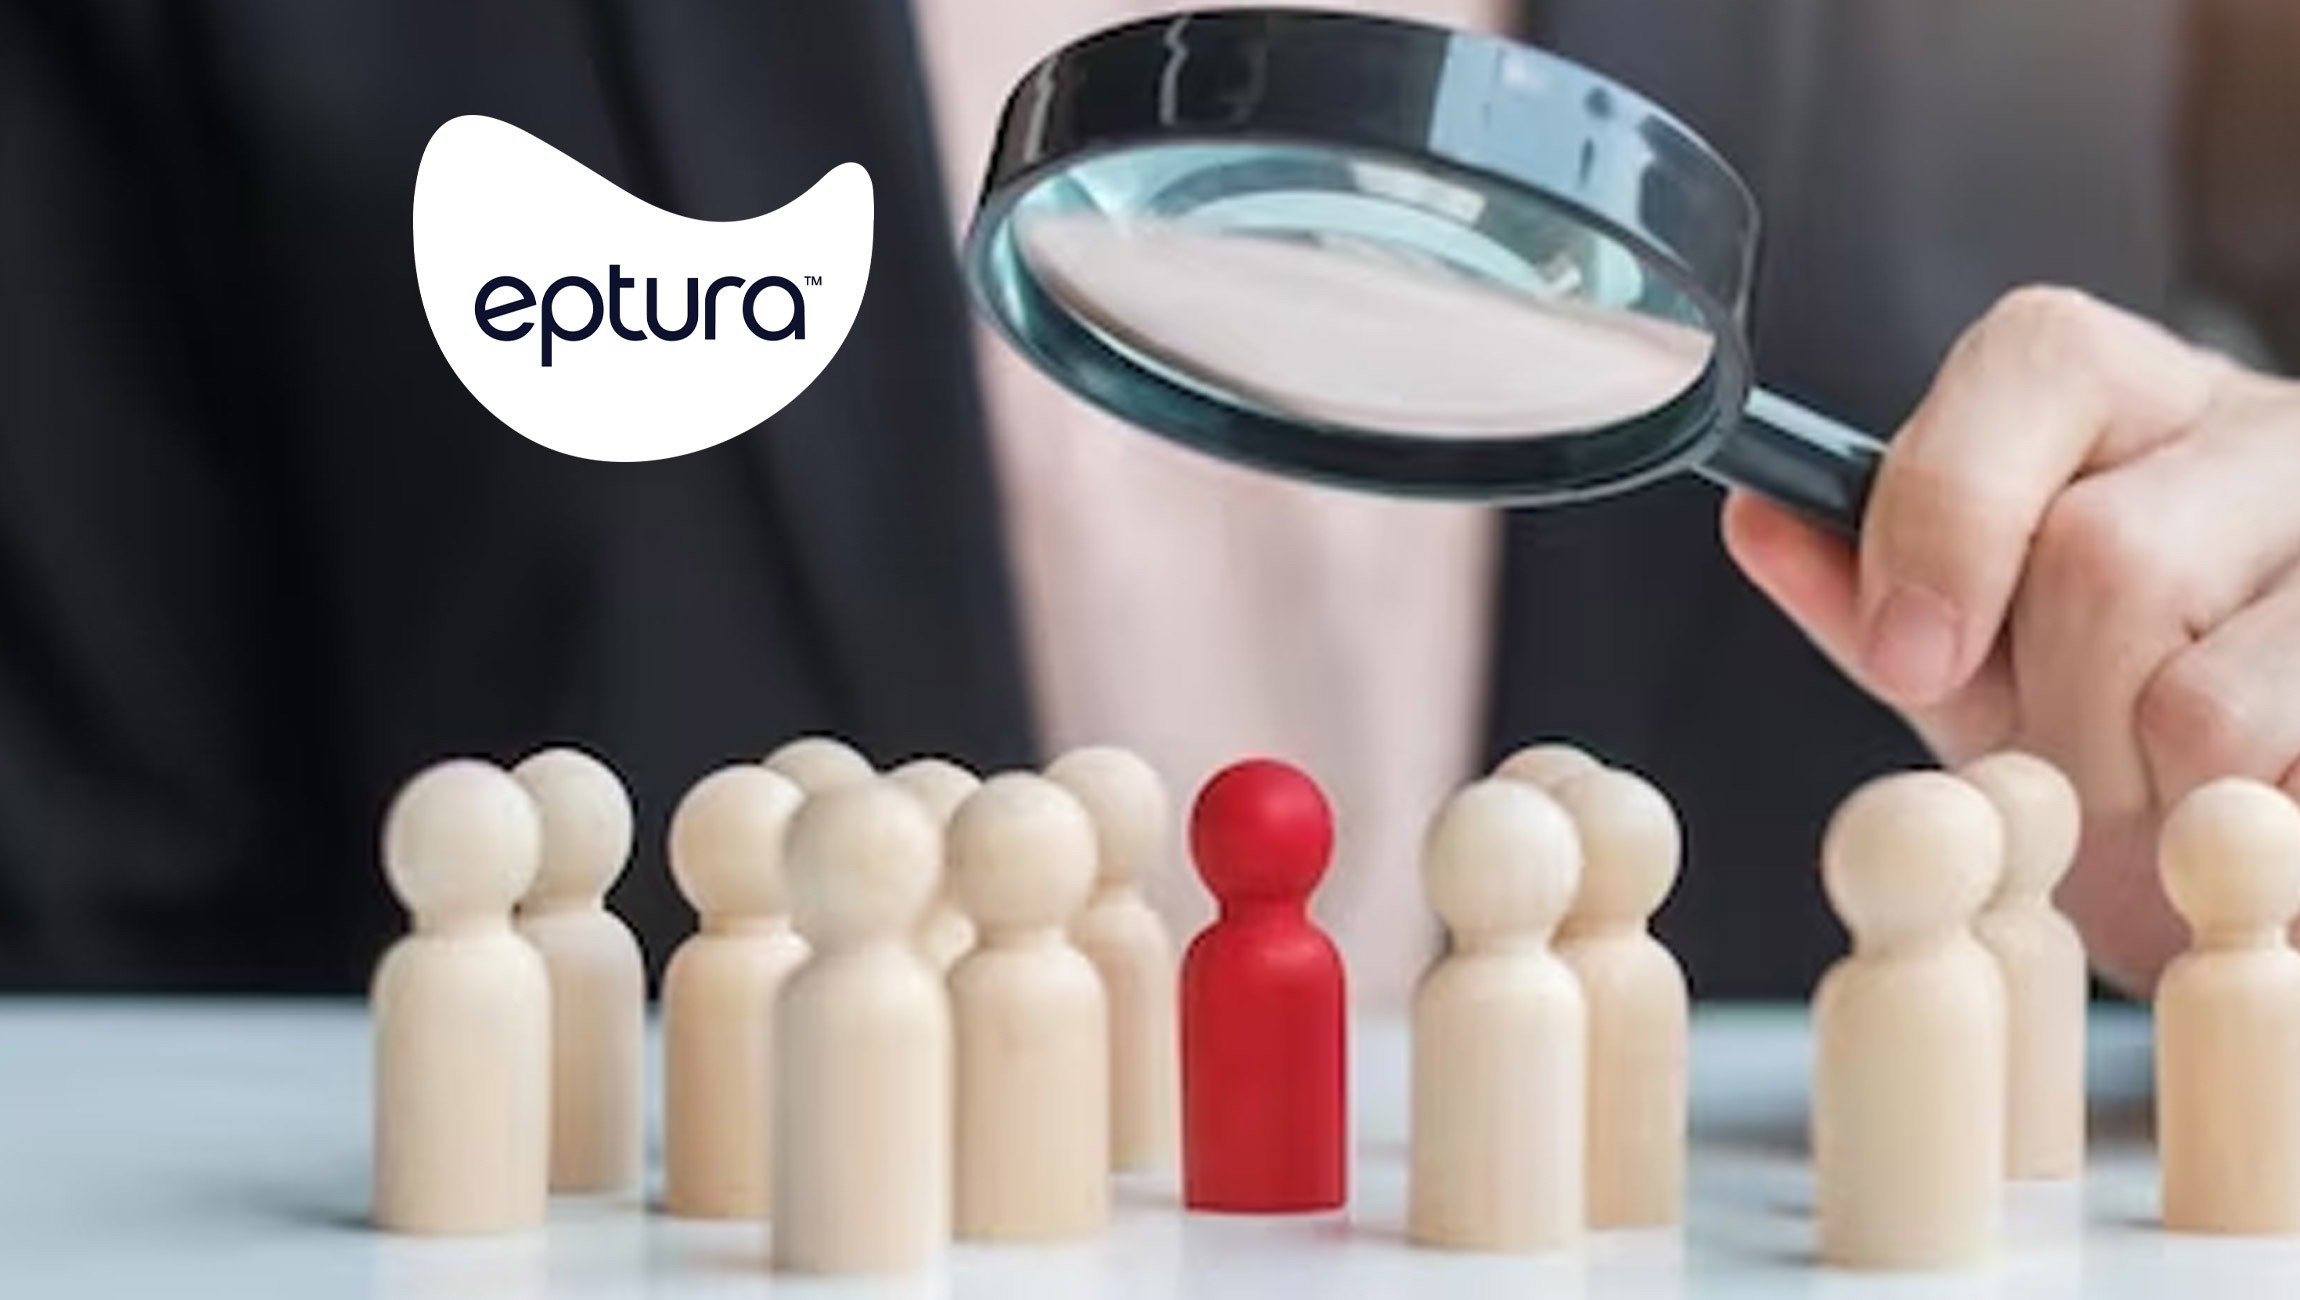 Eptura-Appoints-New-Chief-Product-Officer_-Chief-Revenue-Officer_-and-Key-Regional-Sales-Leaders